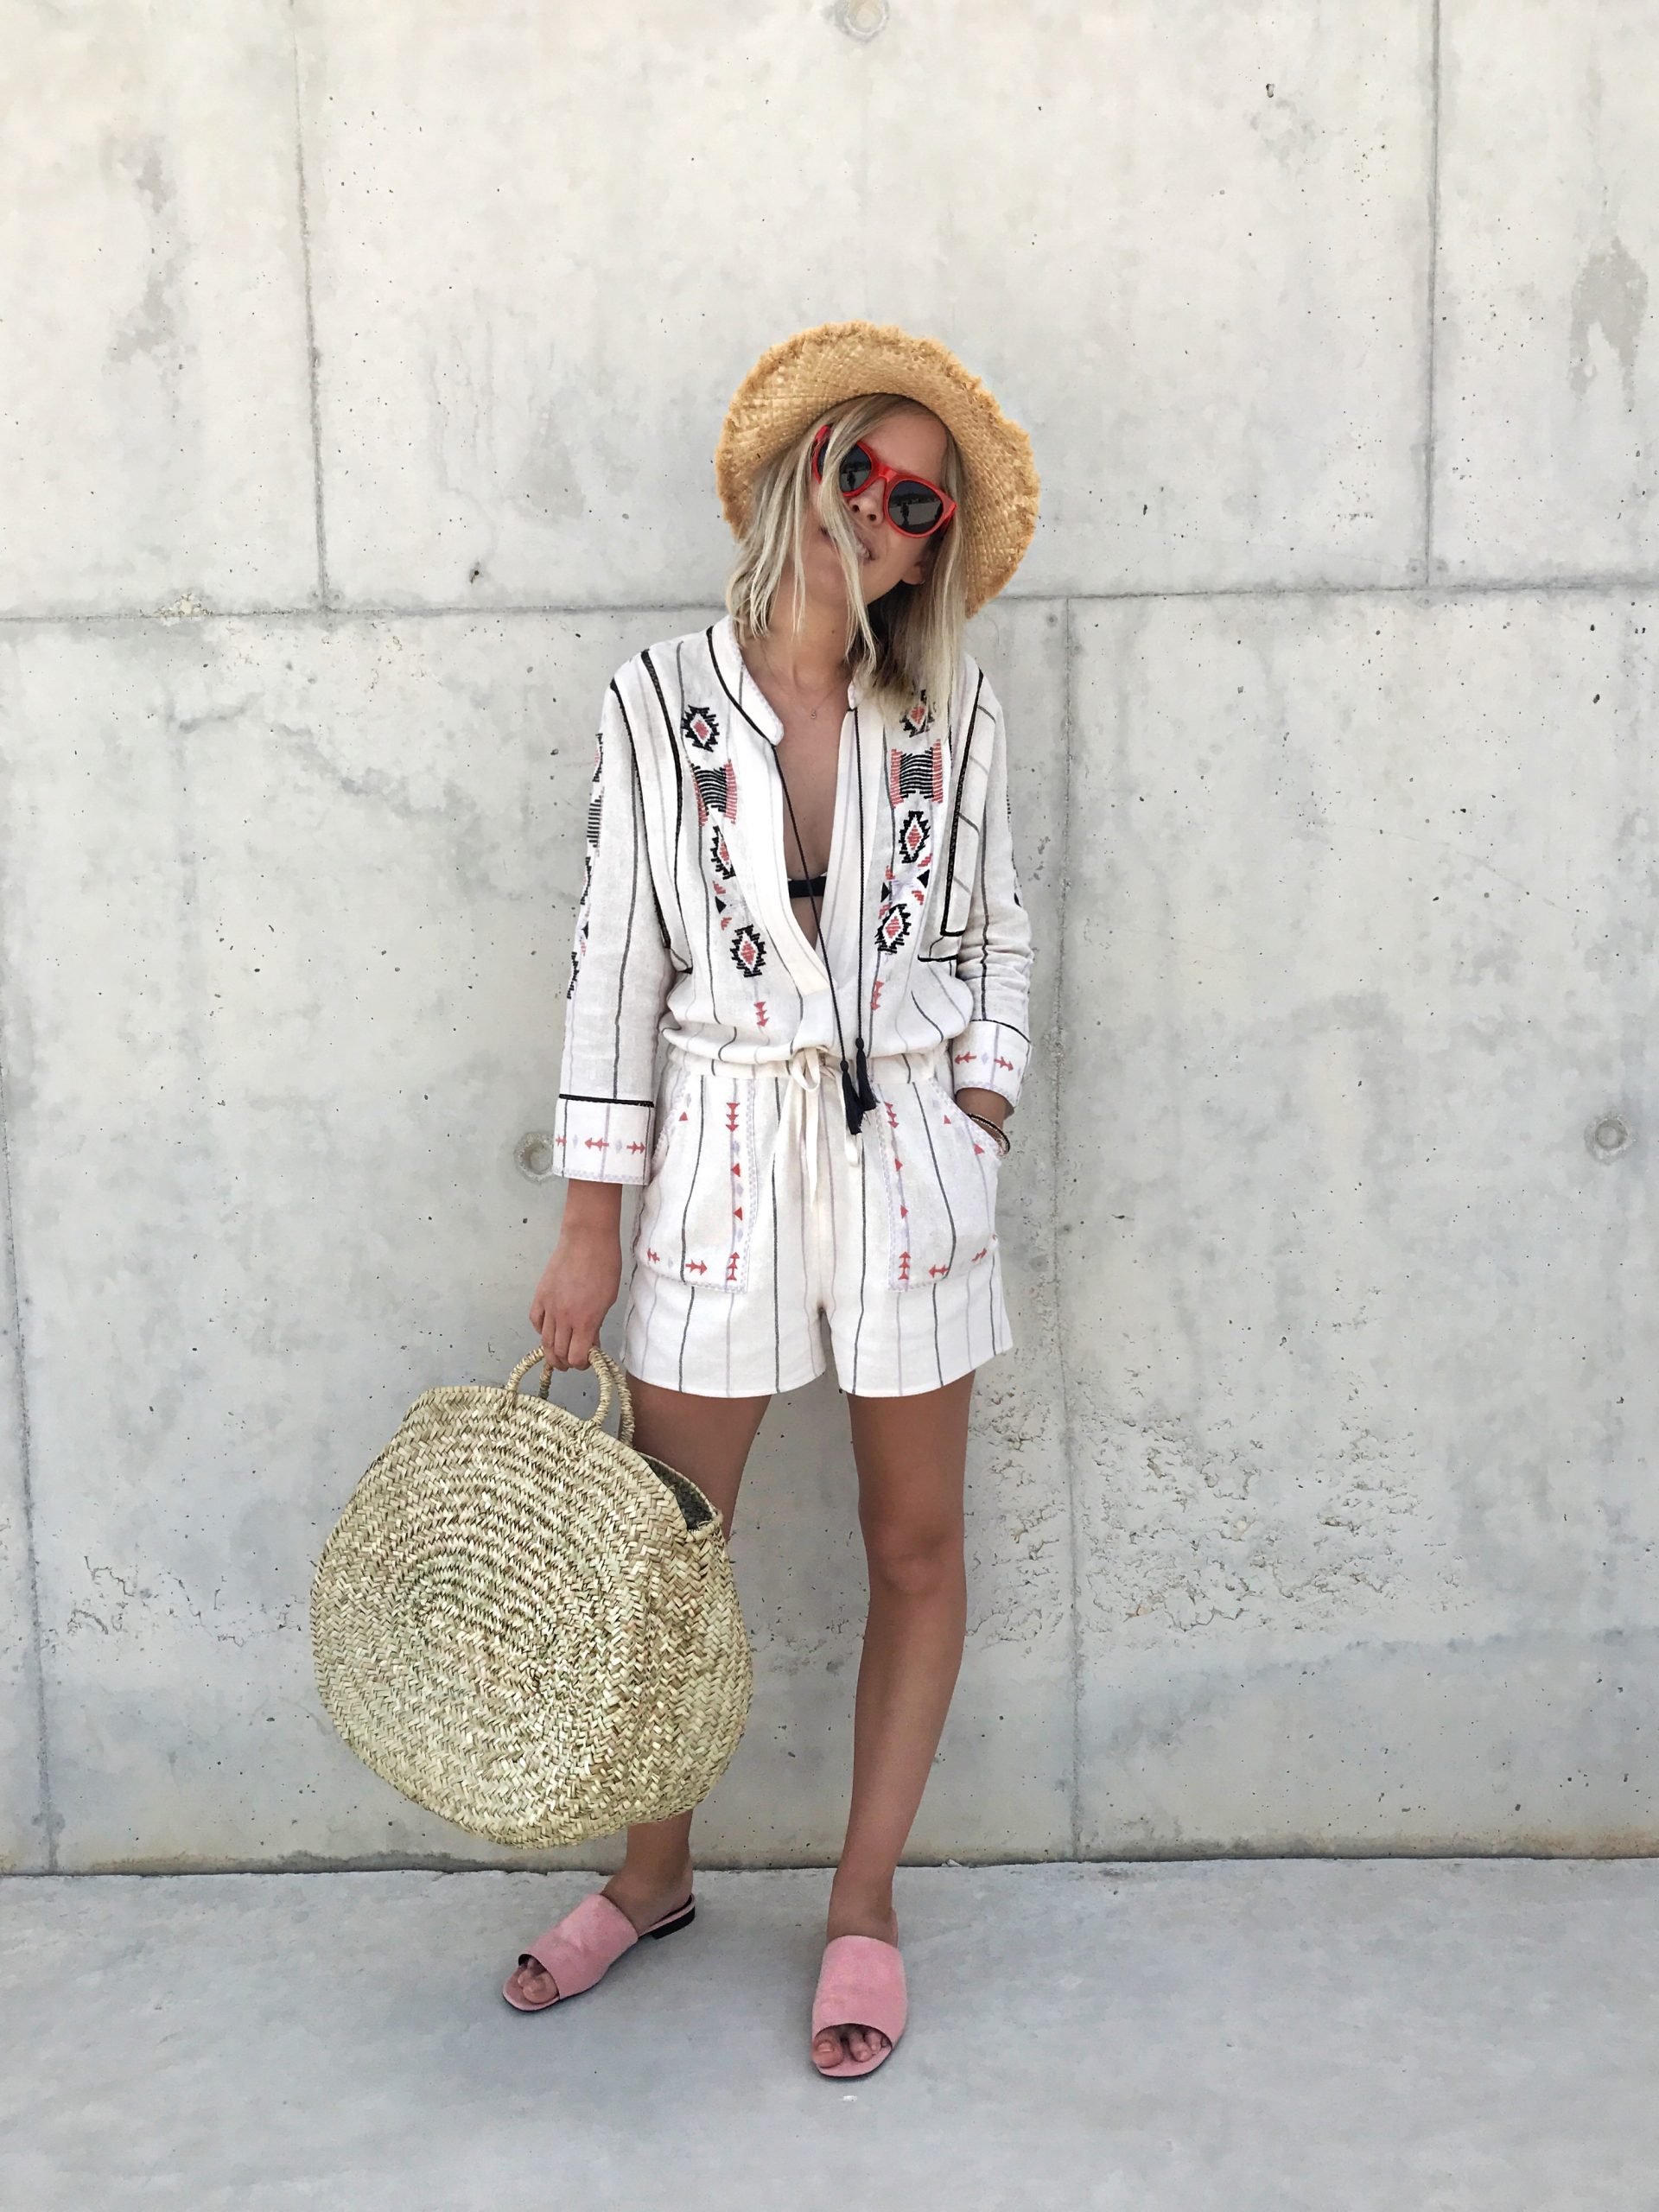 The Frugality Summer outfit